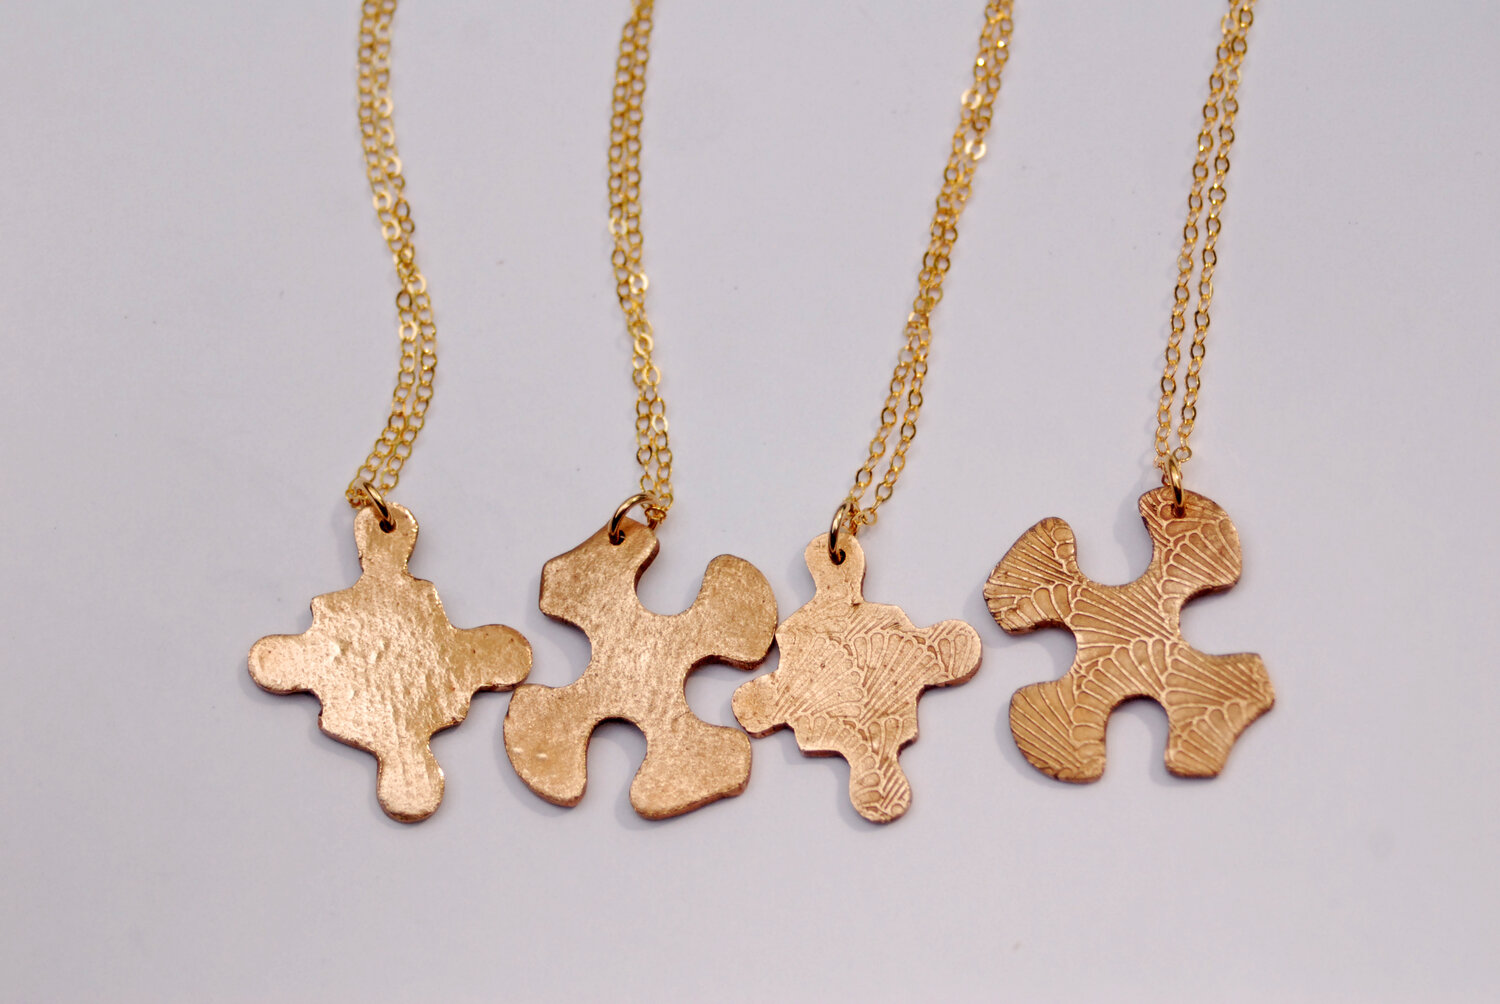 Handmade Bronze or Silver Missing Puzzle Piece Friendship Necklace